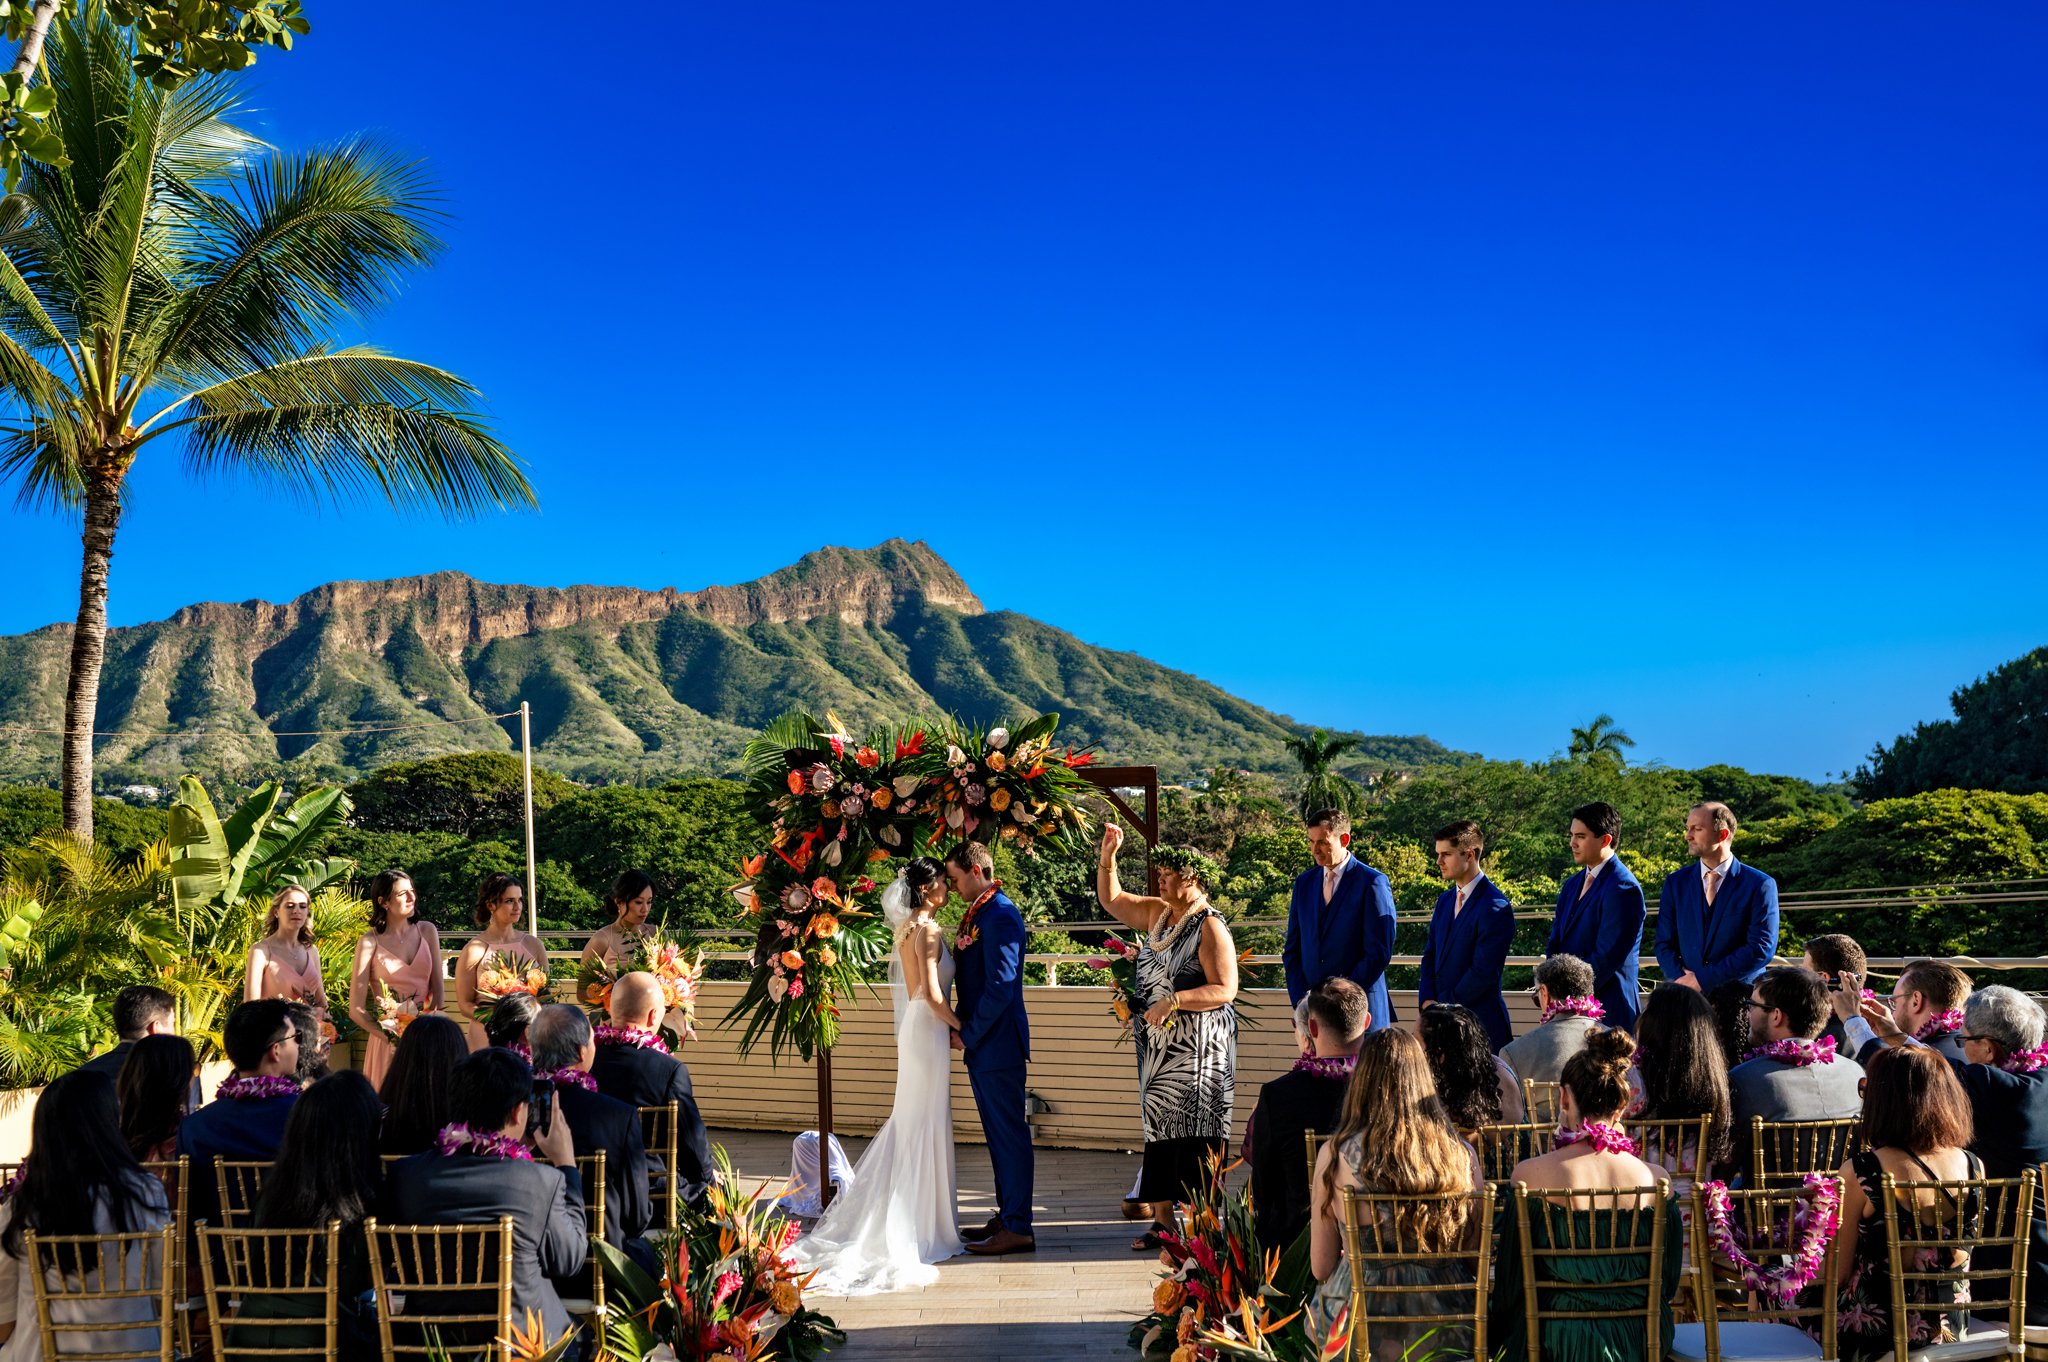 A wedding ceremony in hawaii with palm trees and mountains in the background.